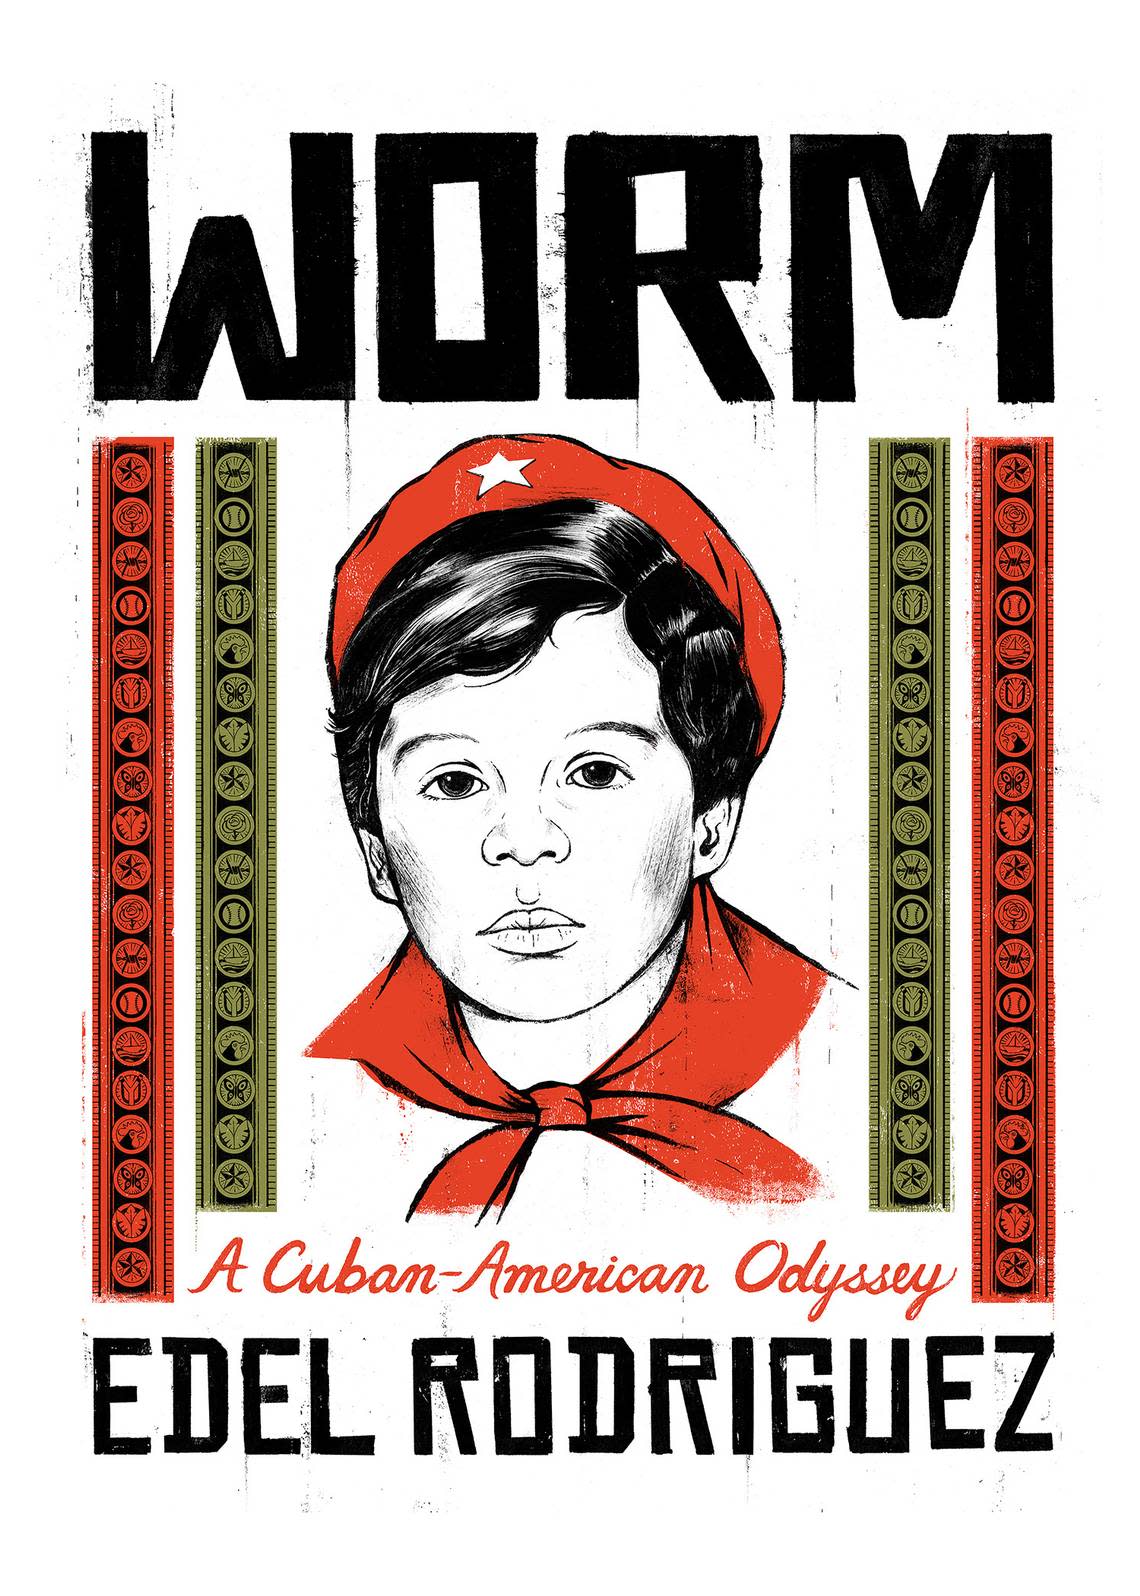 Cover of ‘Worm: A Cuban American Odyssey’, the graphic memoirs of Edel Rodríguez in which he reflects his childhood in a rural town in Cuba, El Gabriel, until his departure from the island due to the Mariel exodus, in 1980, to 8 years old.